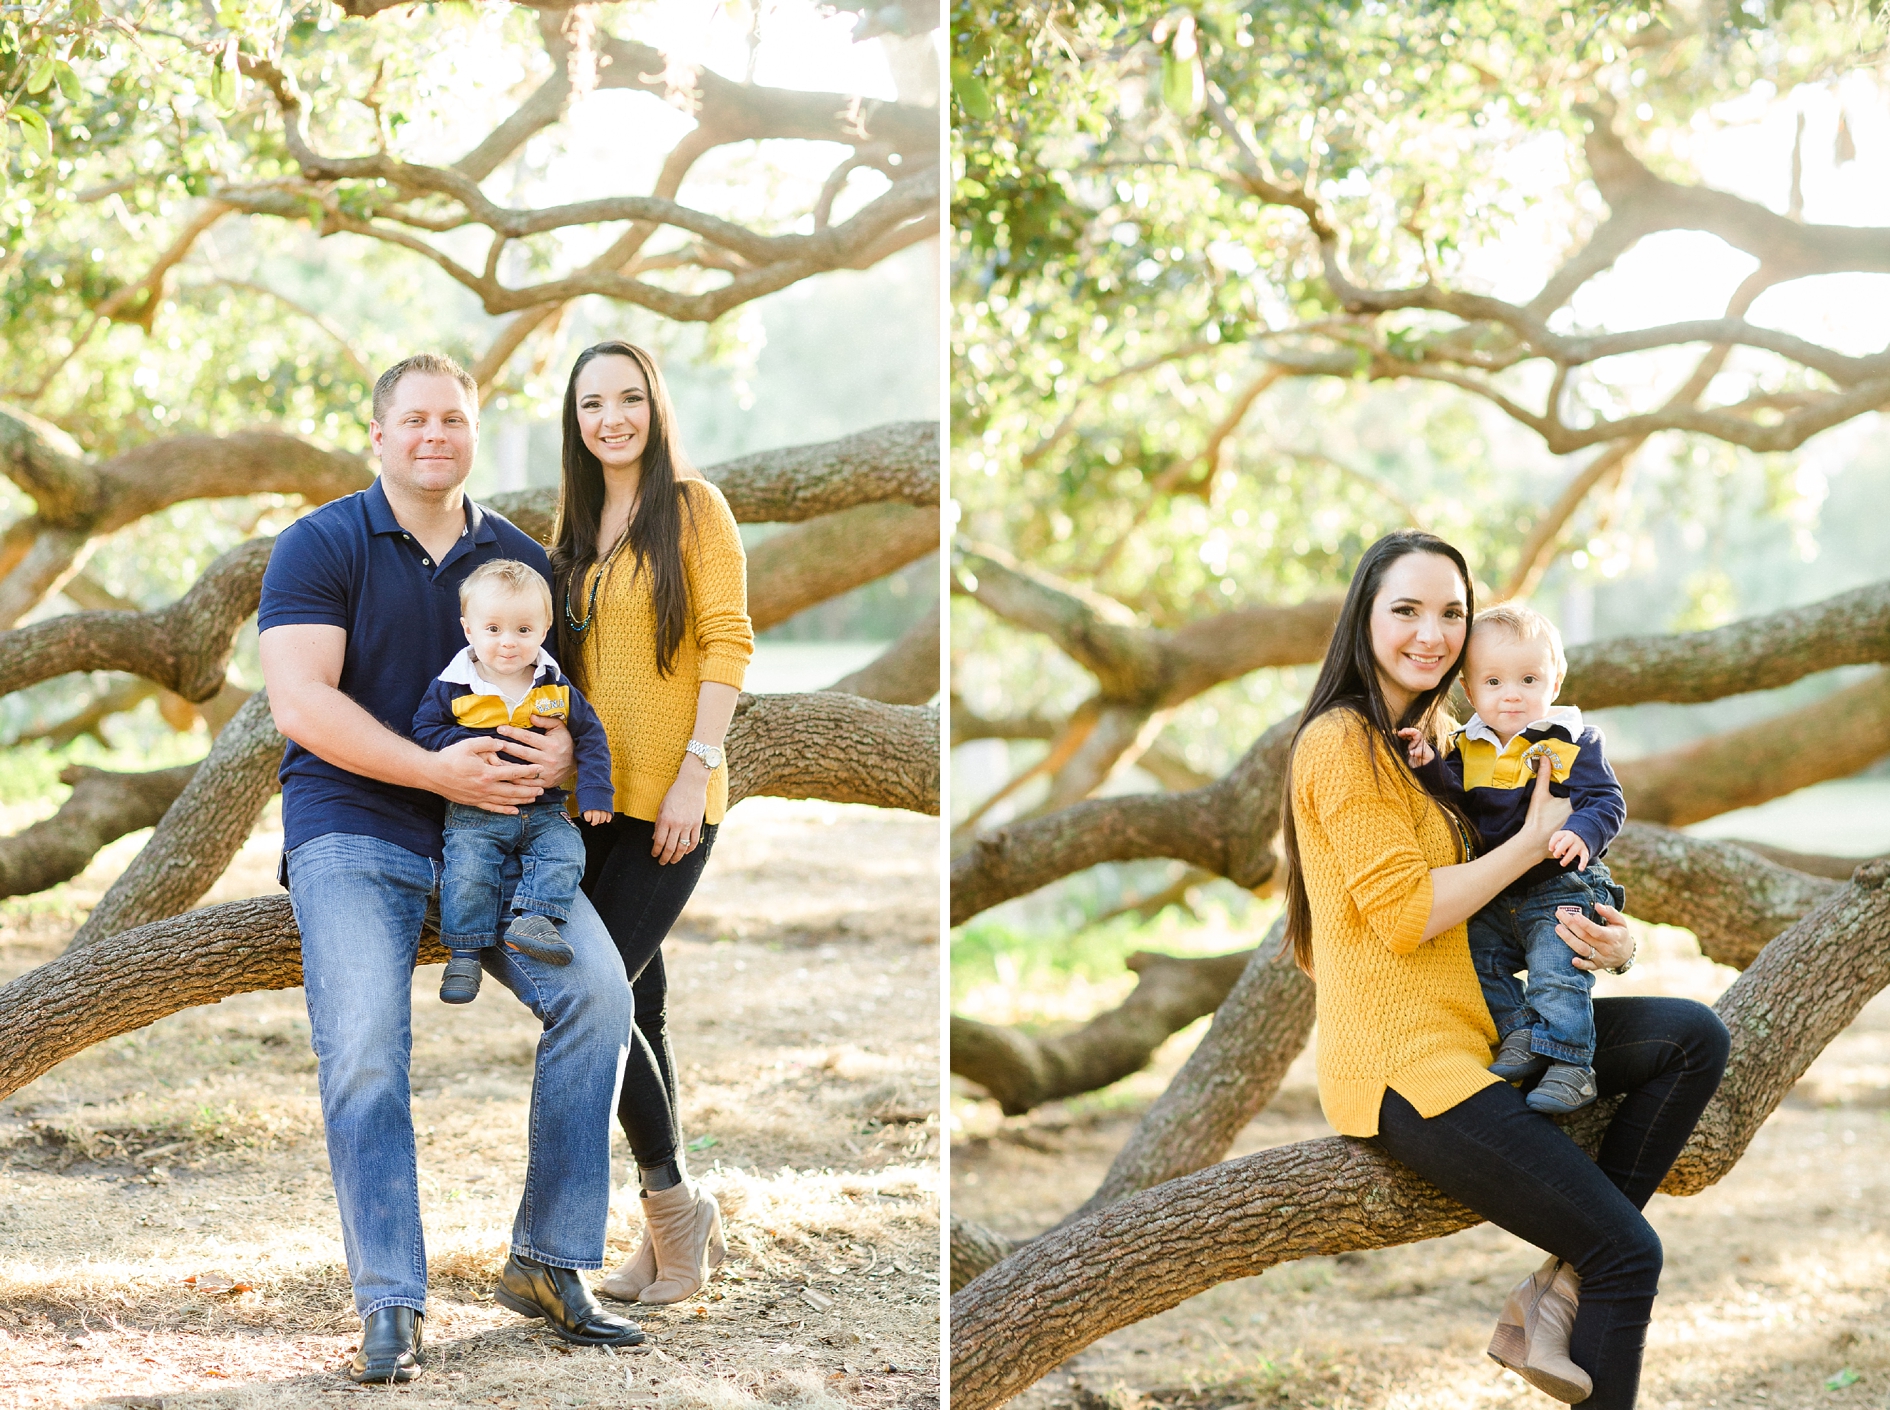 Tampa Family Photographer | © Ailyn La Torre Photography 2016 